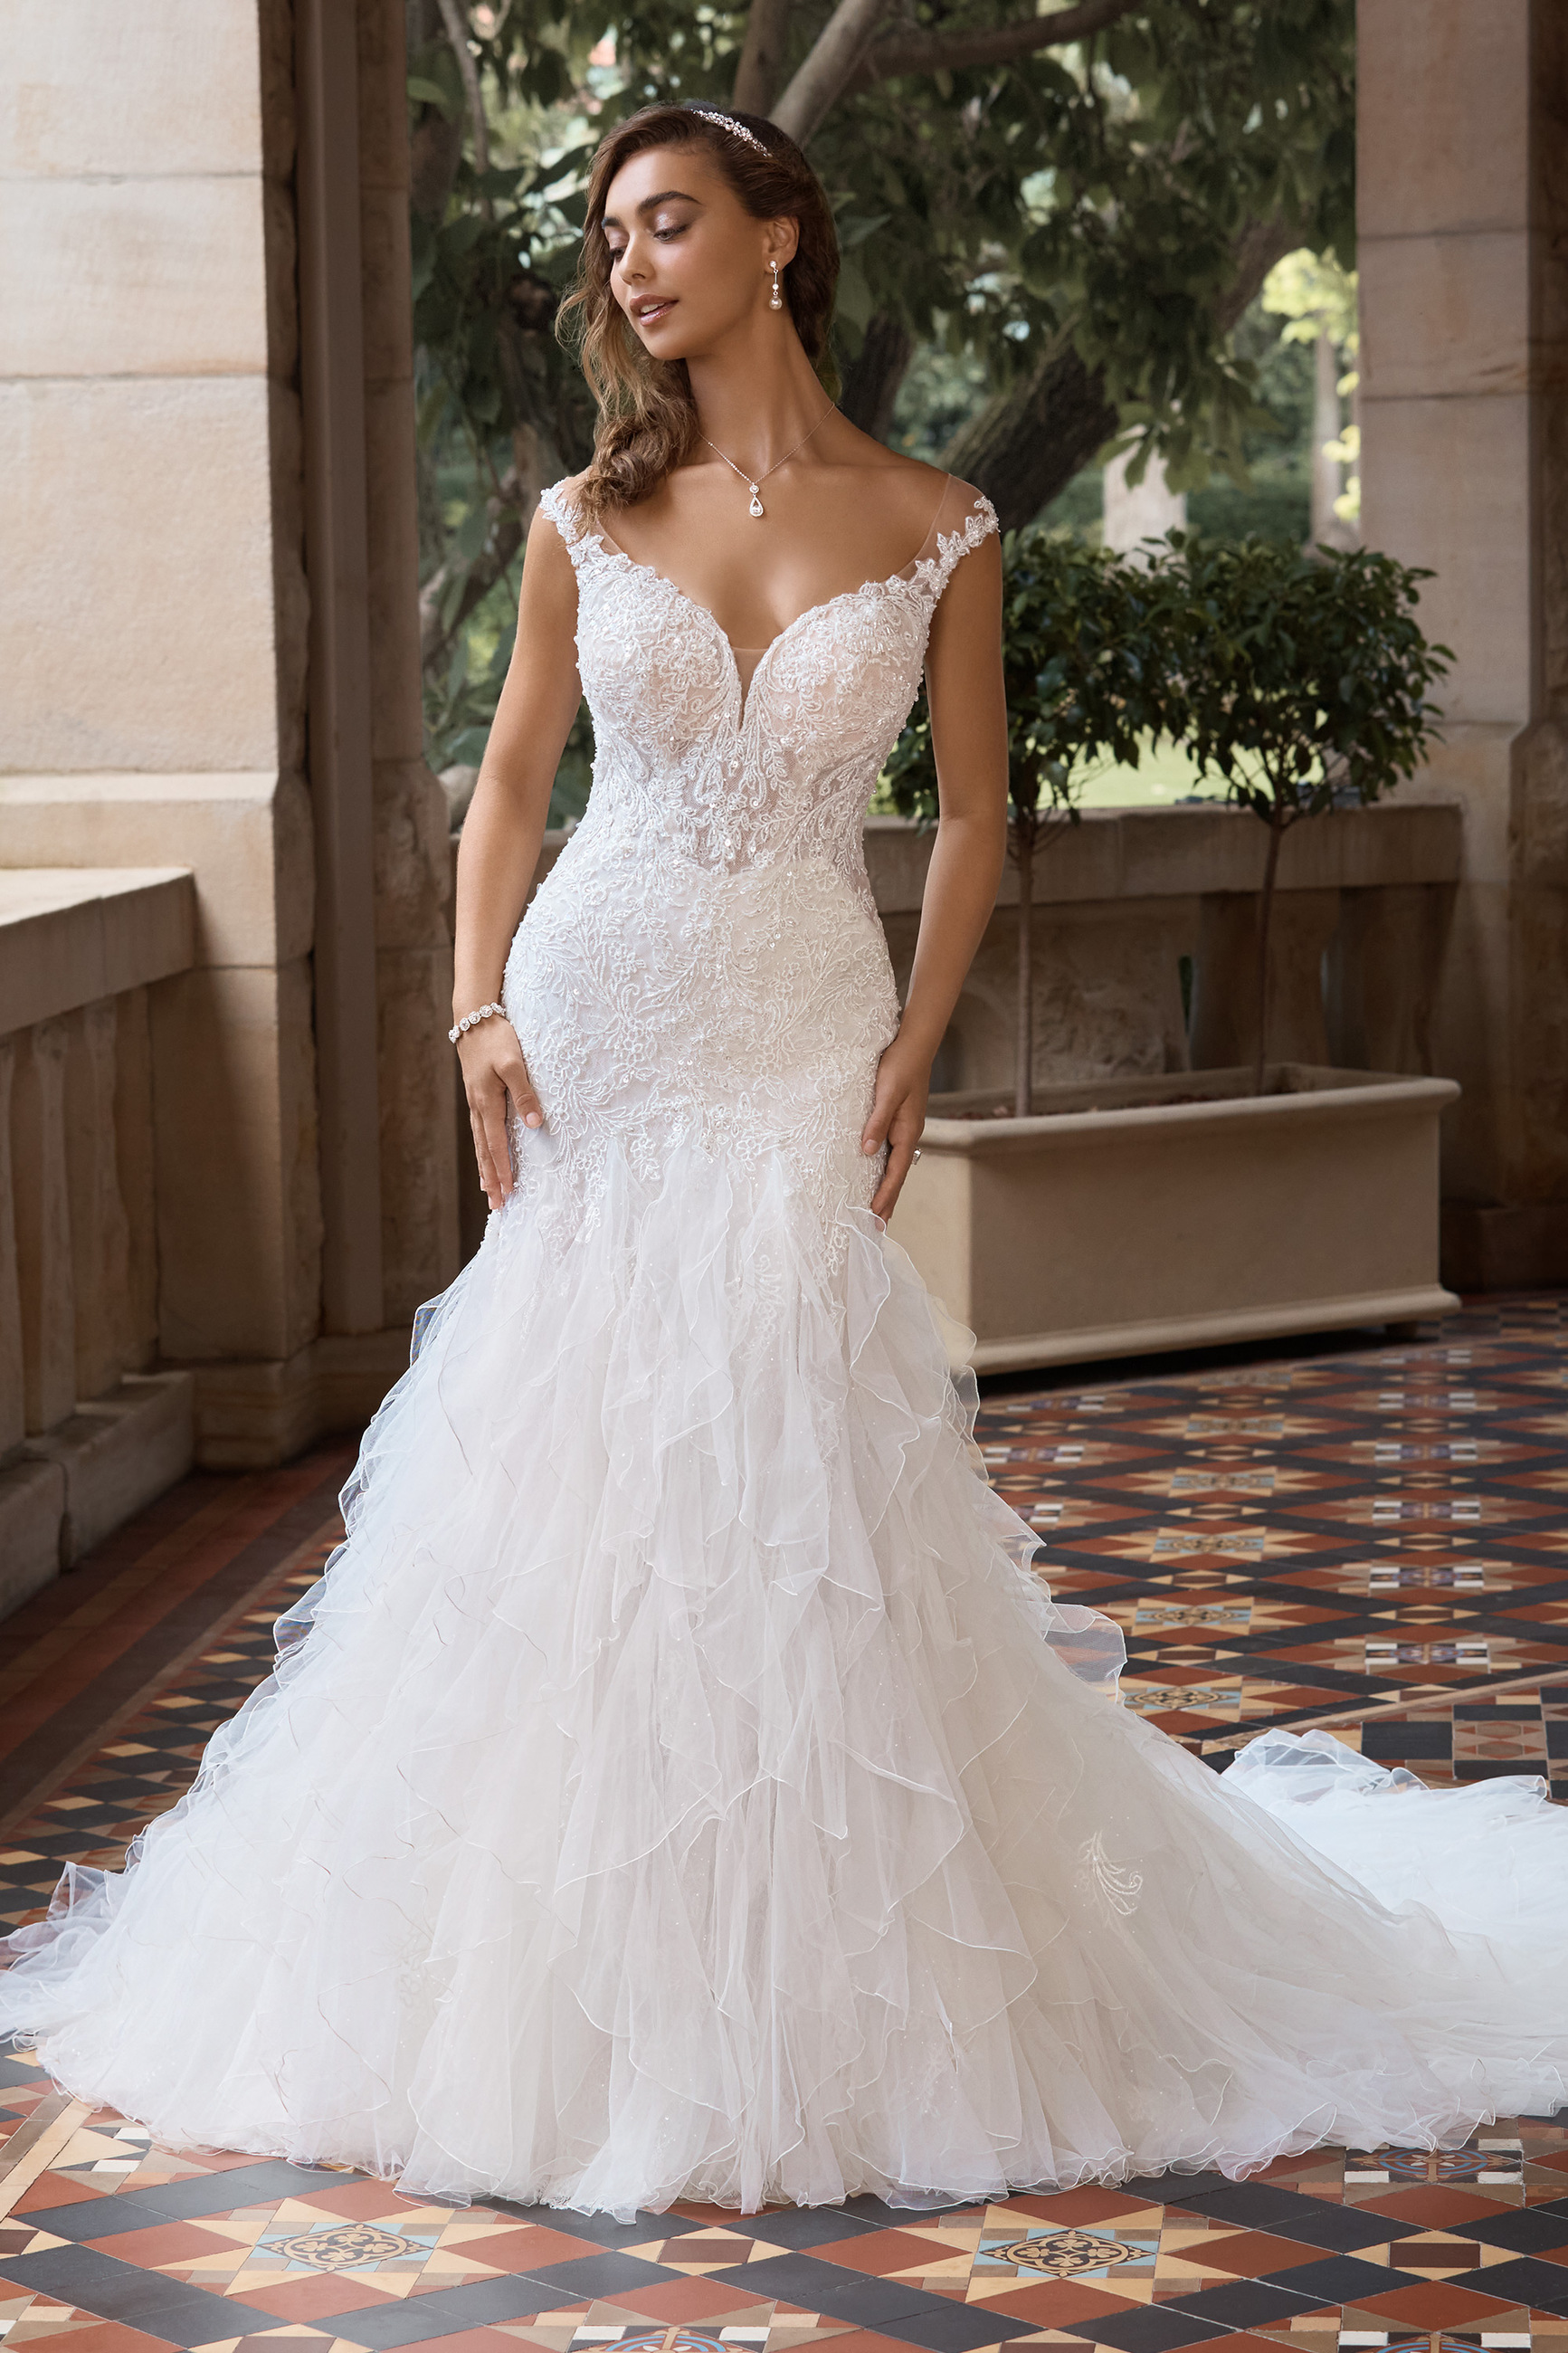 Melisa Sweetheart Neckline Strapless Beading Lace Mermaid Wedding Dress with Train Satin Bridal Ball Gowns